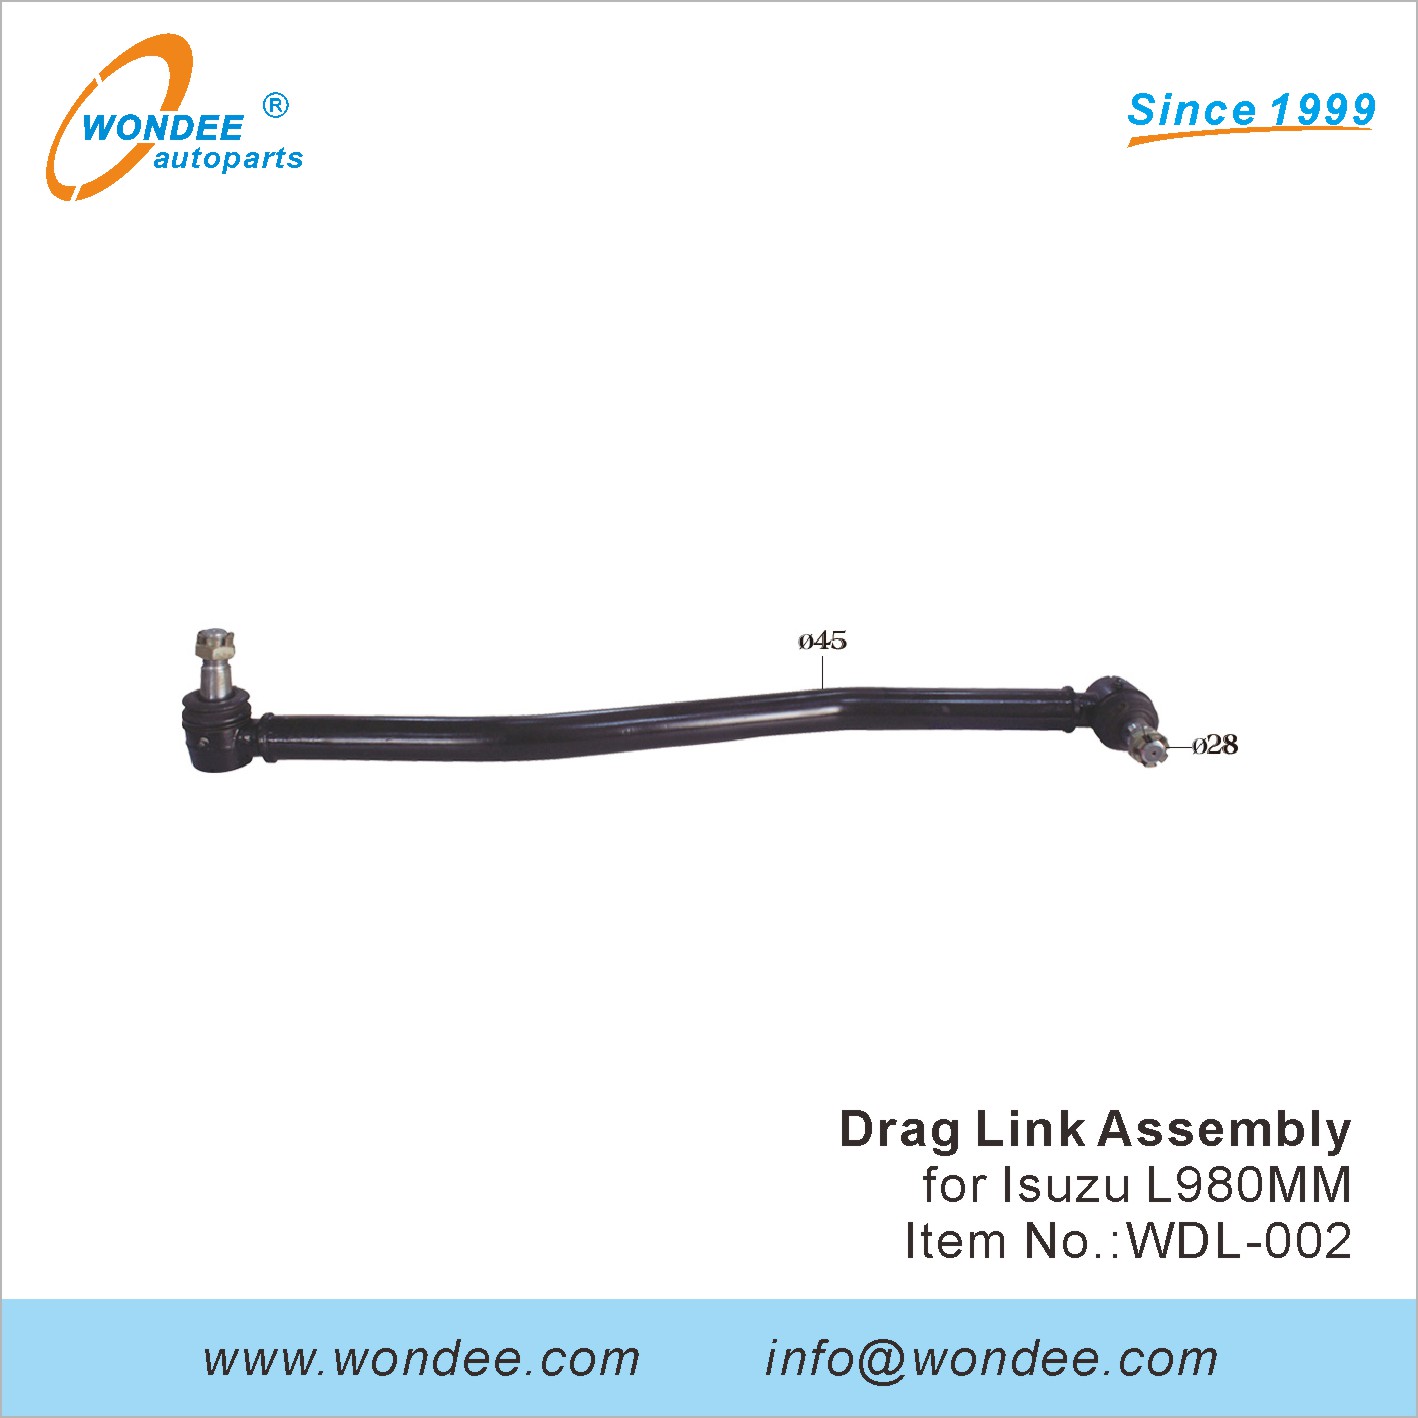 WONDEE drag link assembly (2)